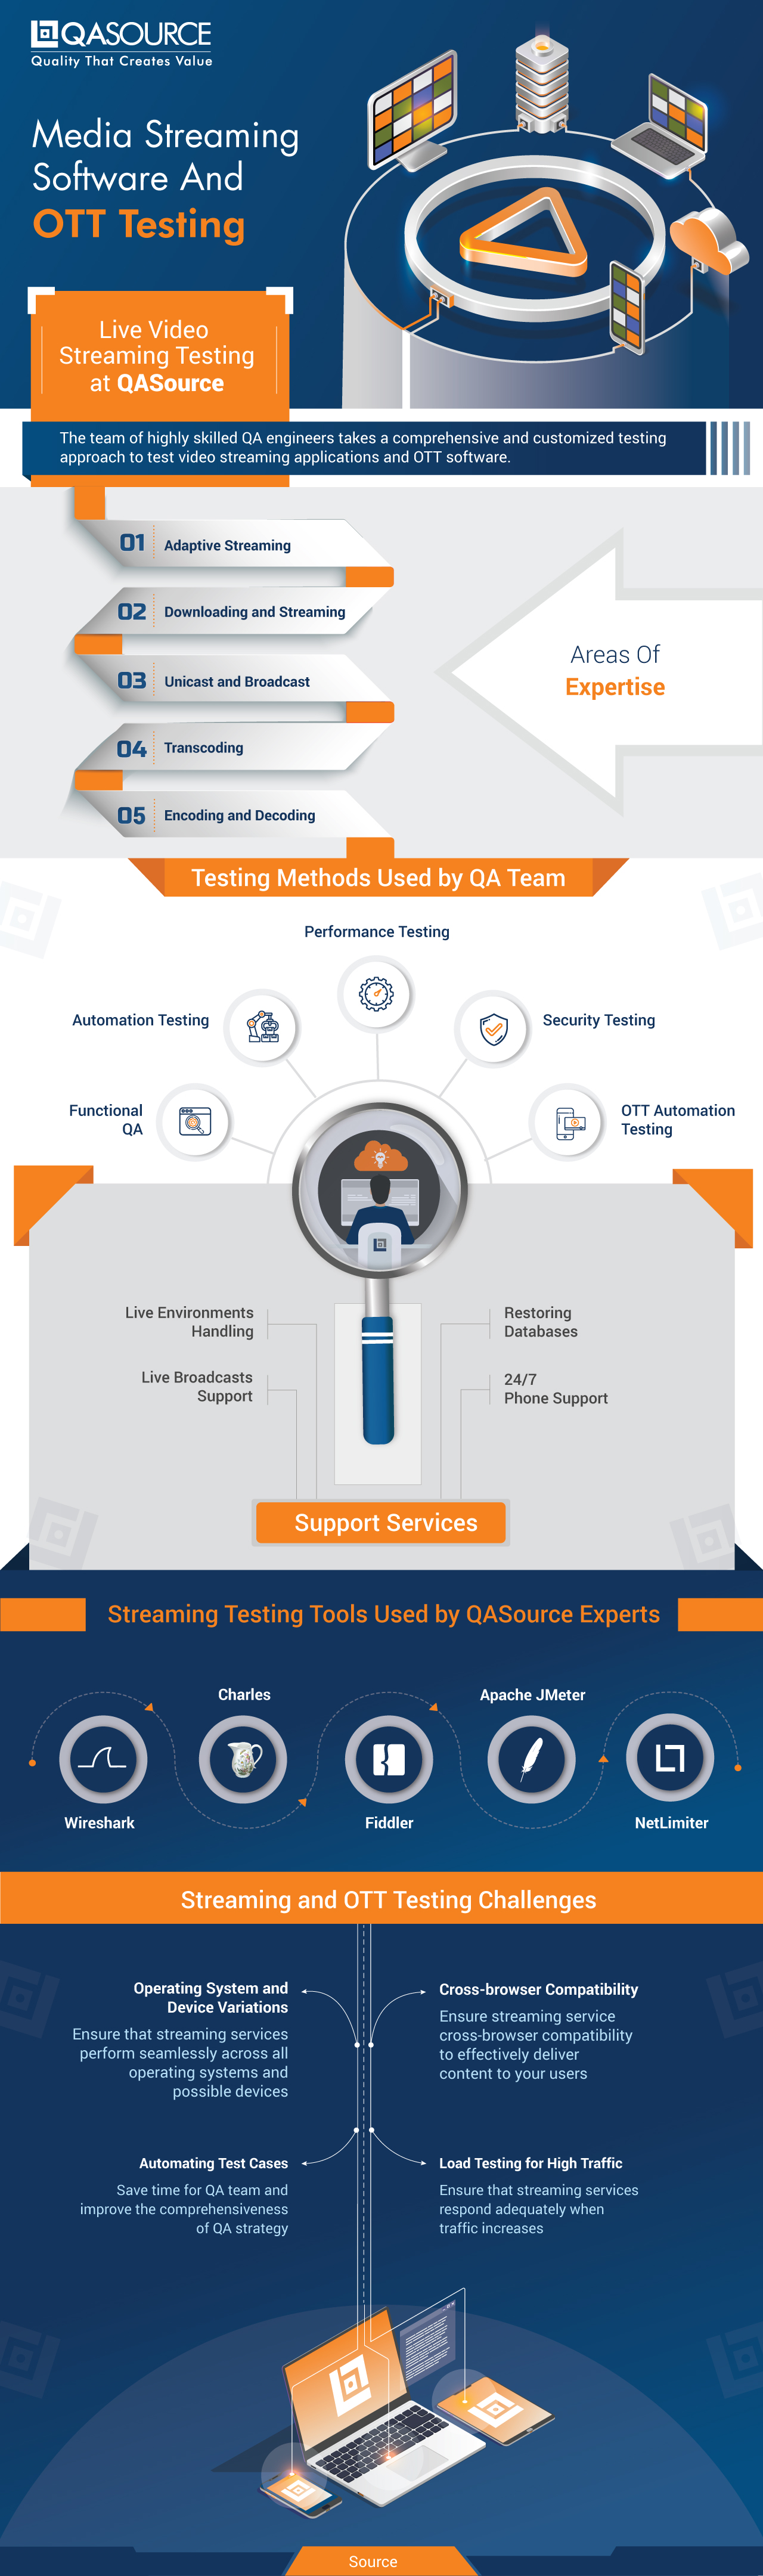 https://www.qasource.com/media-streaming-software-and-out-testing.